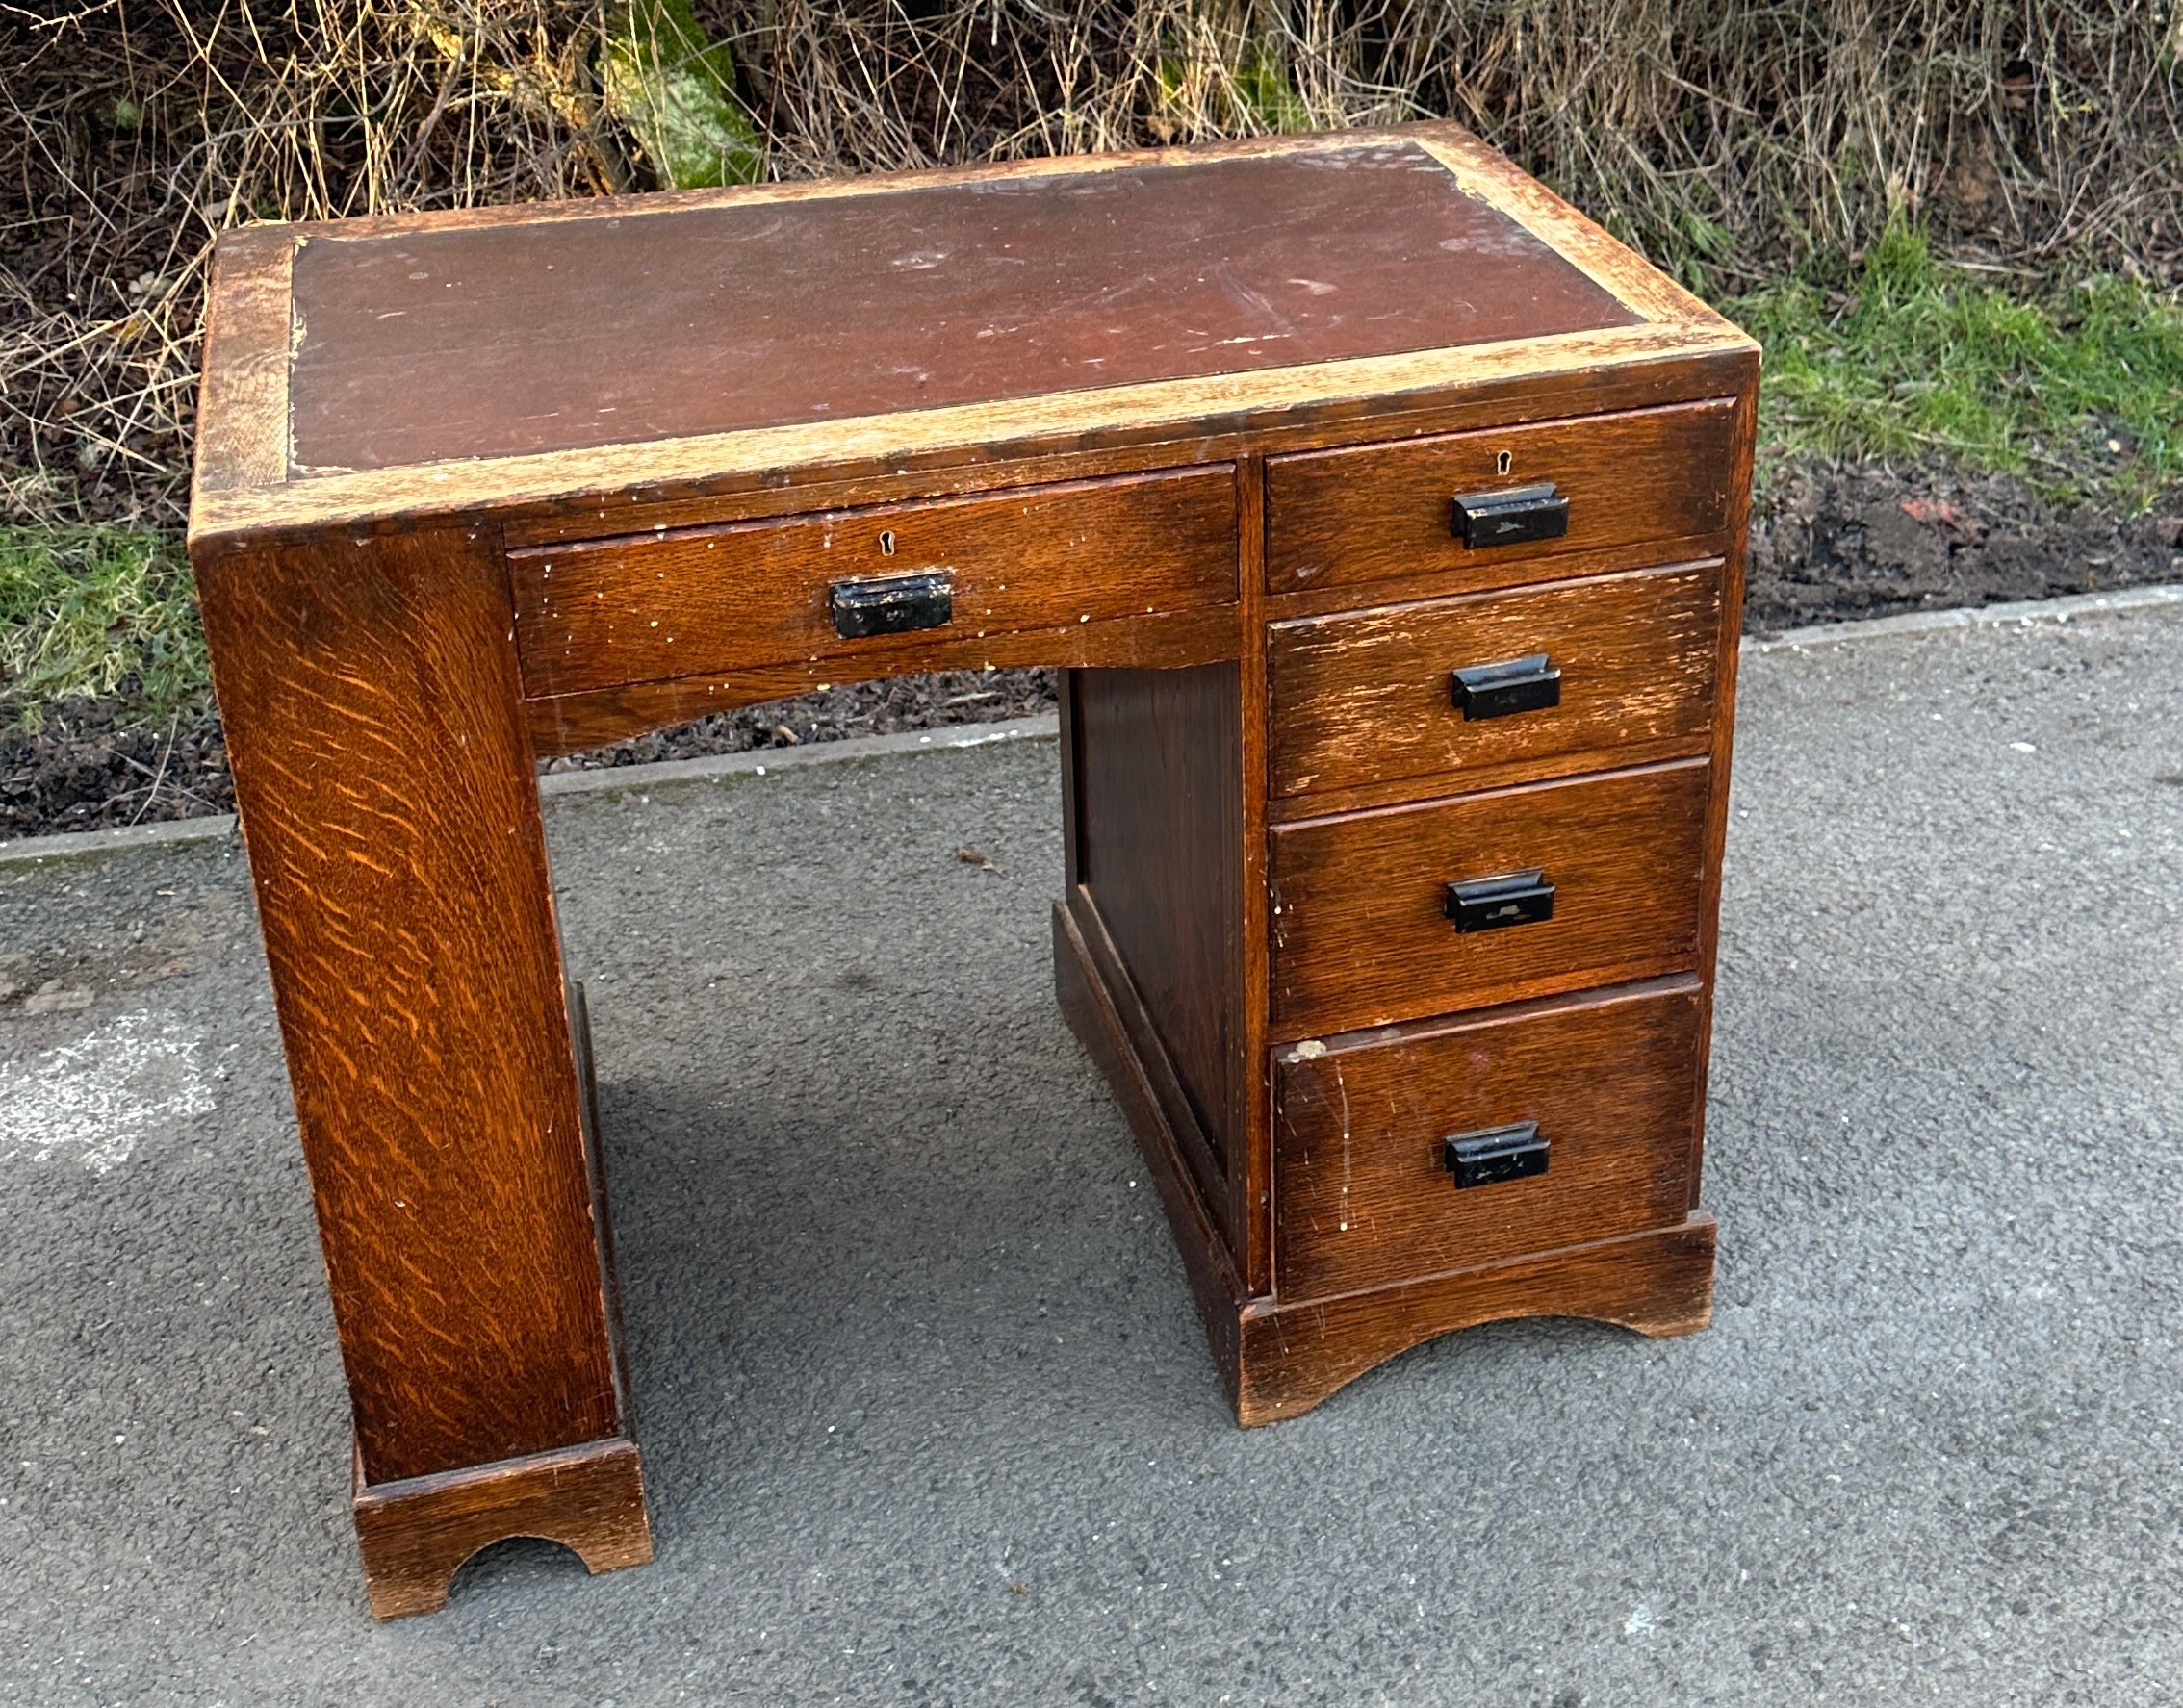 Oak deco five drawer leather topped desk with bookcase to the side measures 30 inches tall 36 inches